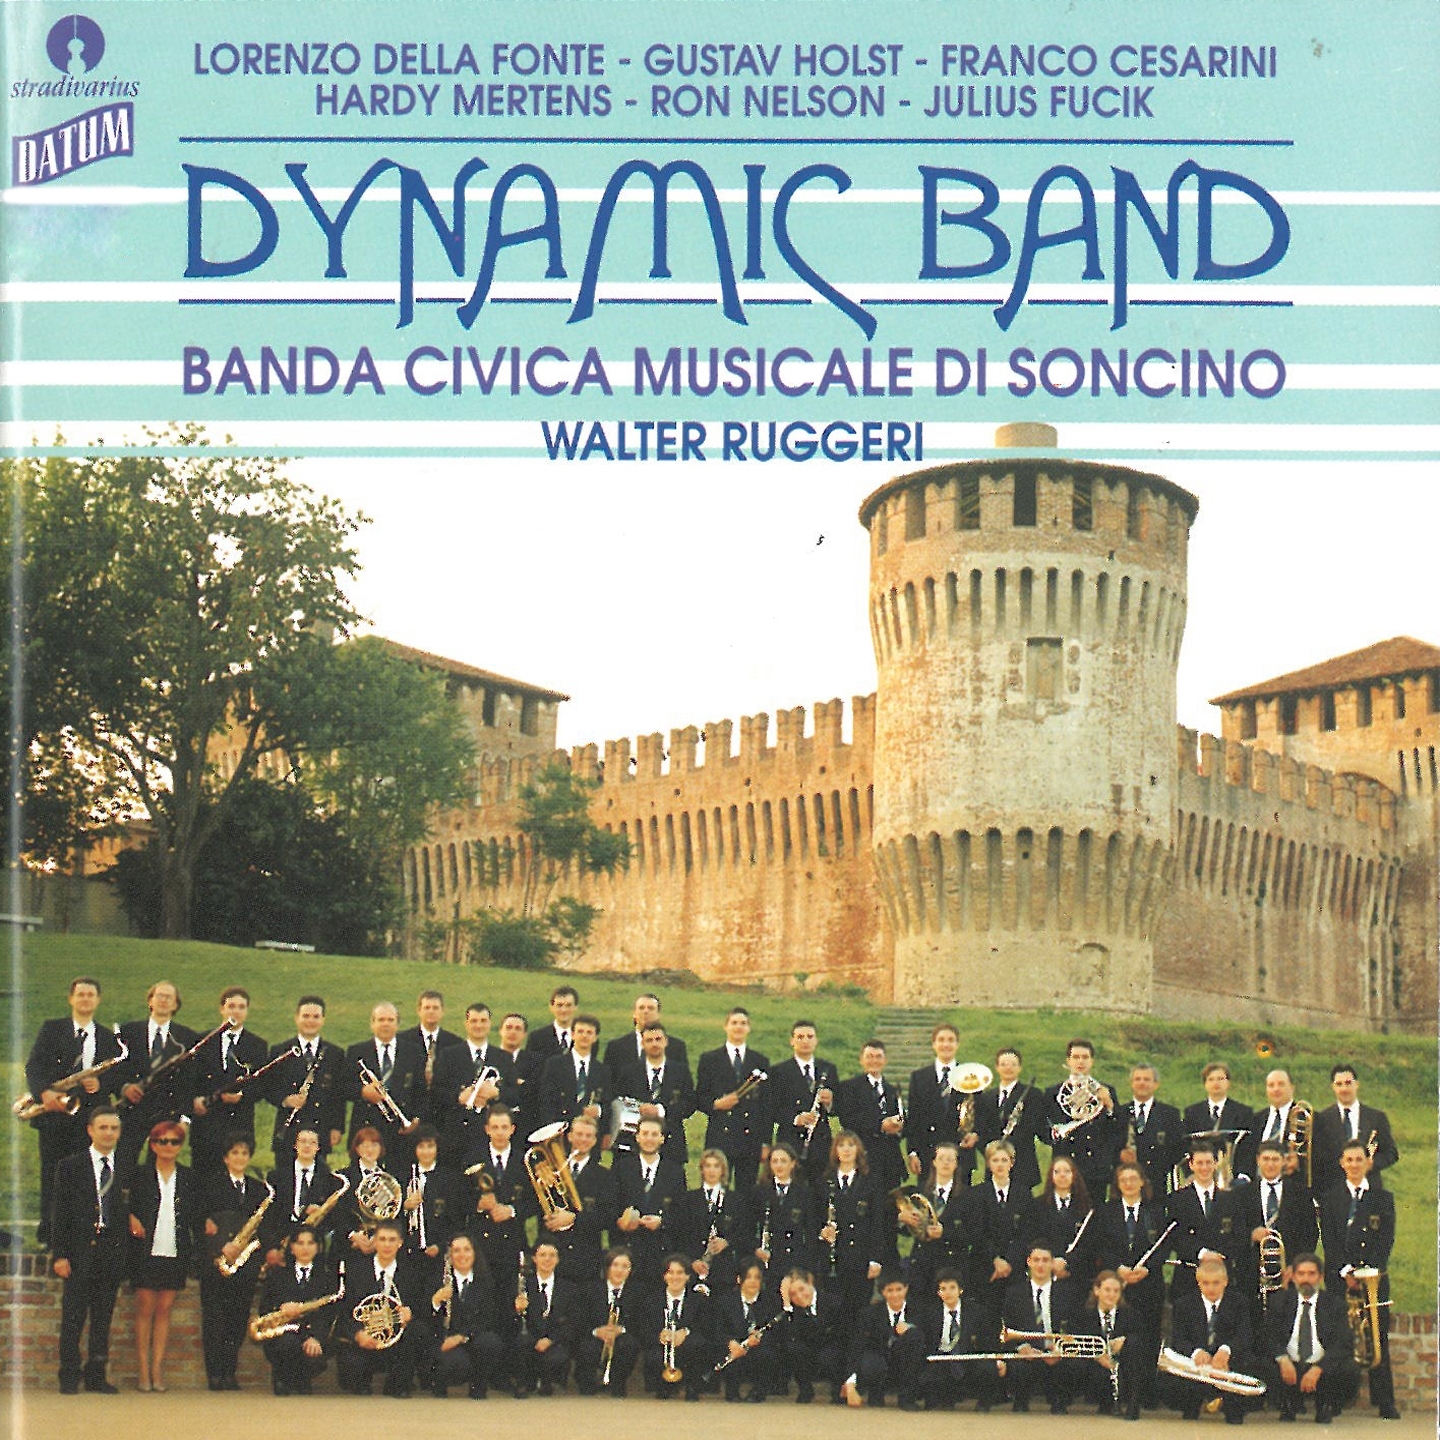 Suite No. 1 for Military Band in E-Flat Major, Op. 28: II. Intermezzo